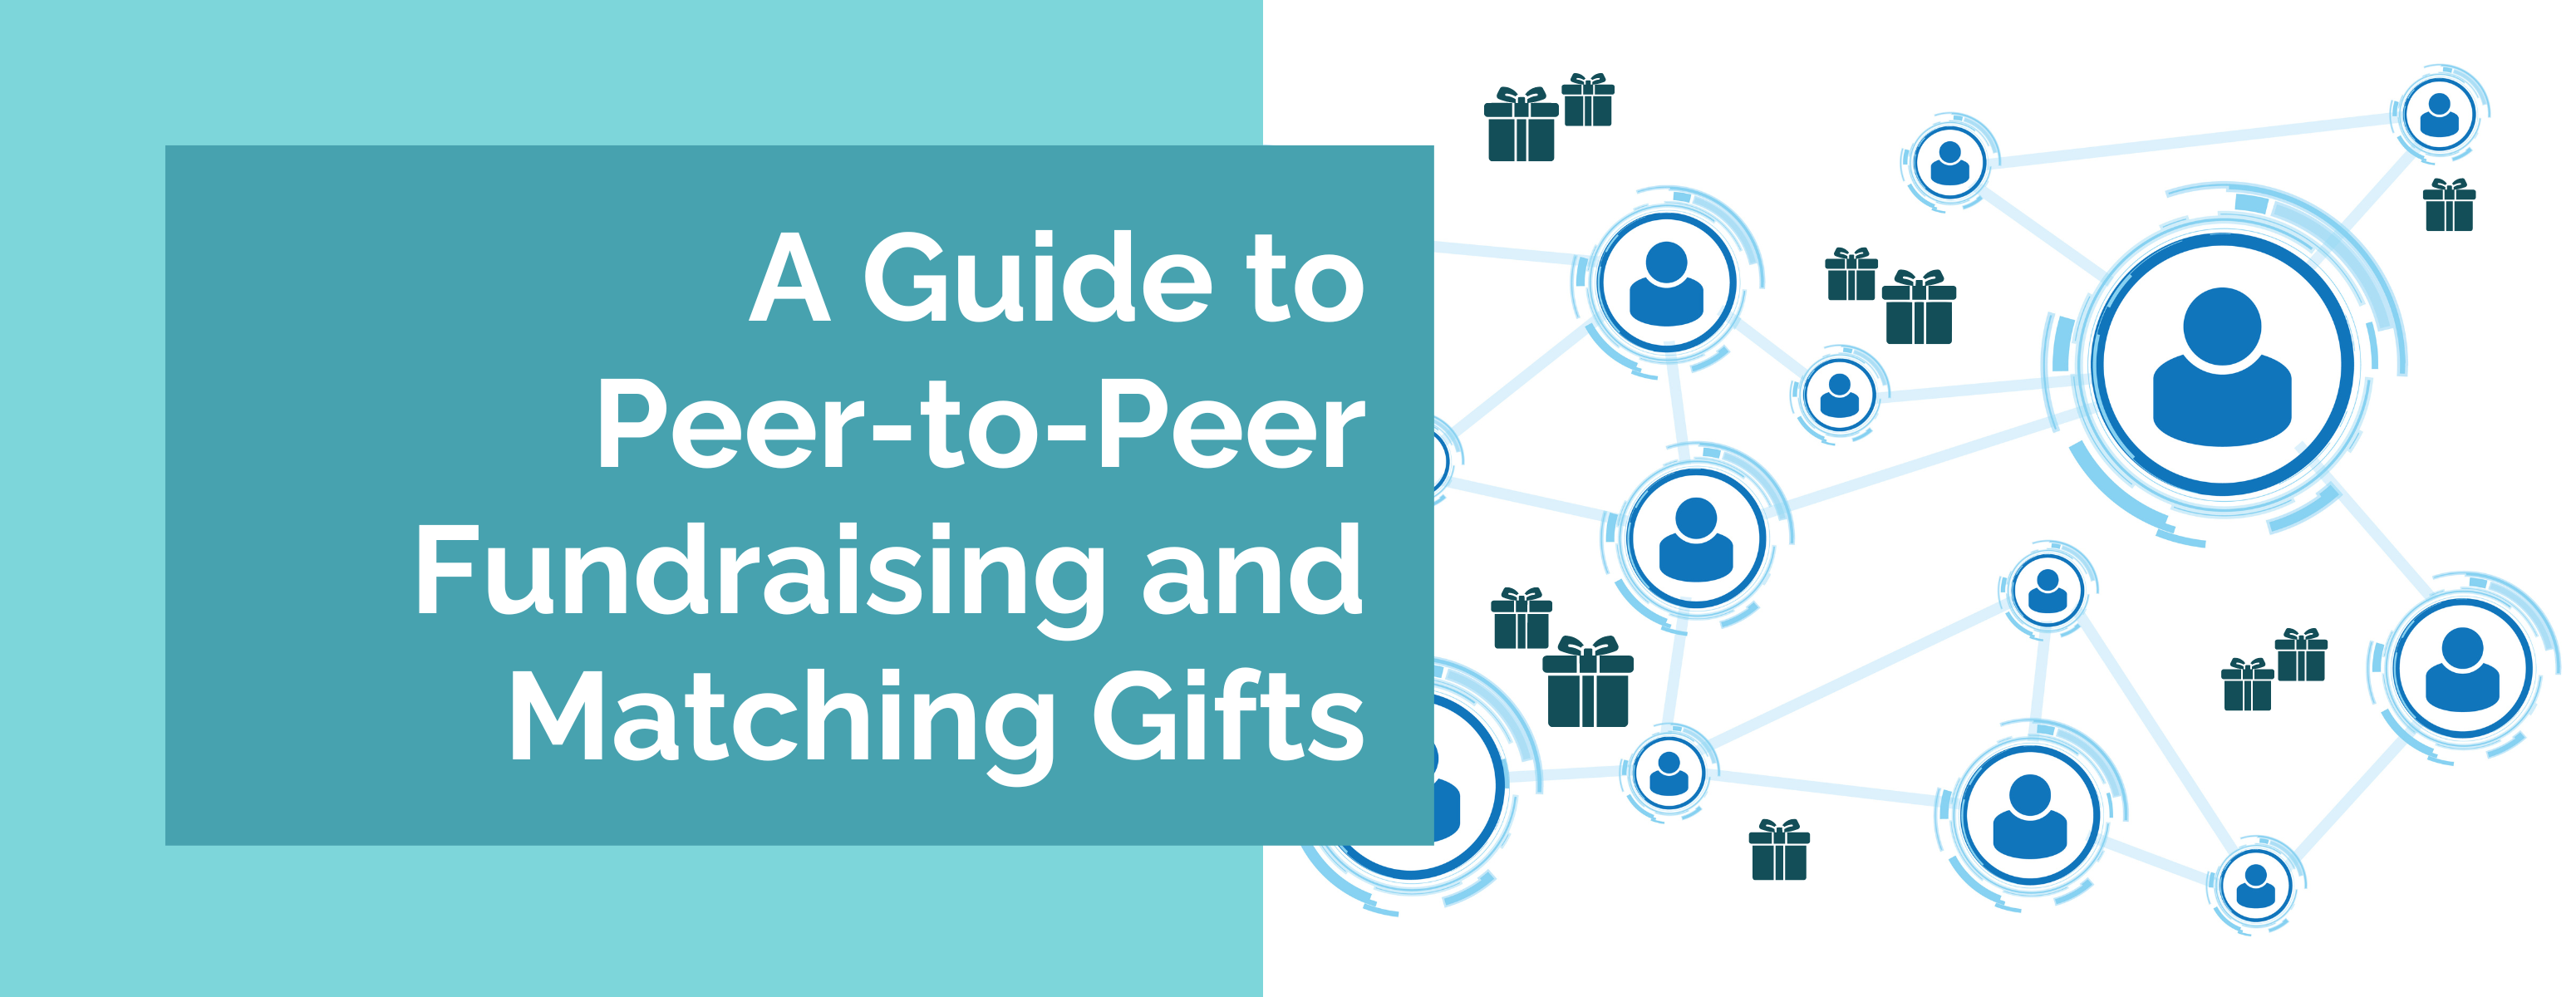 A Guide to Peer-to-Peer Fundraising and Matching Gifts